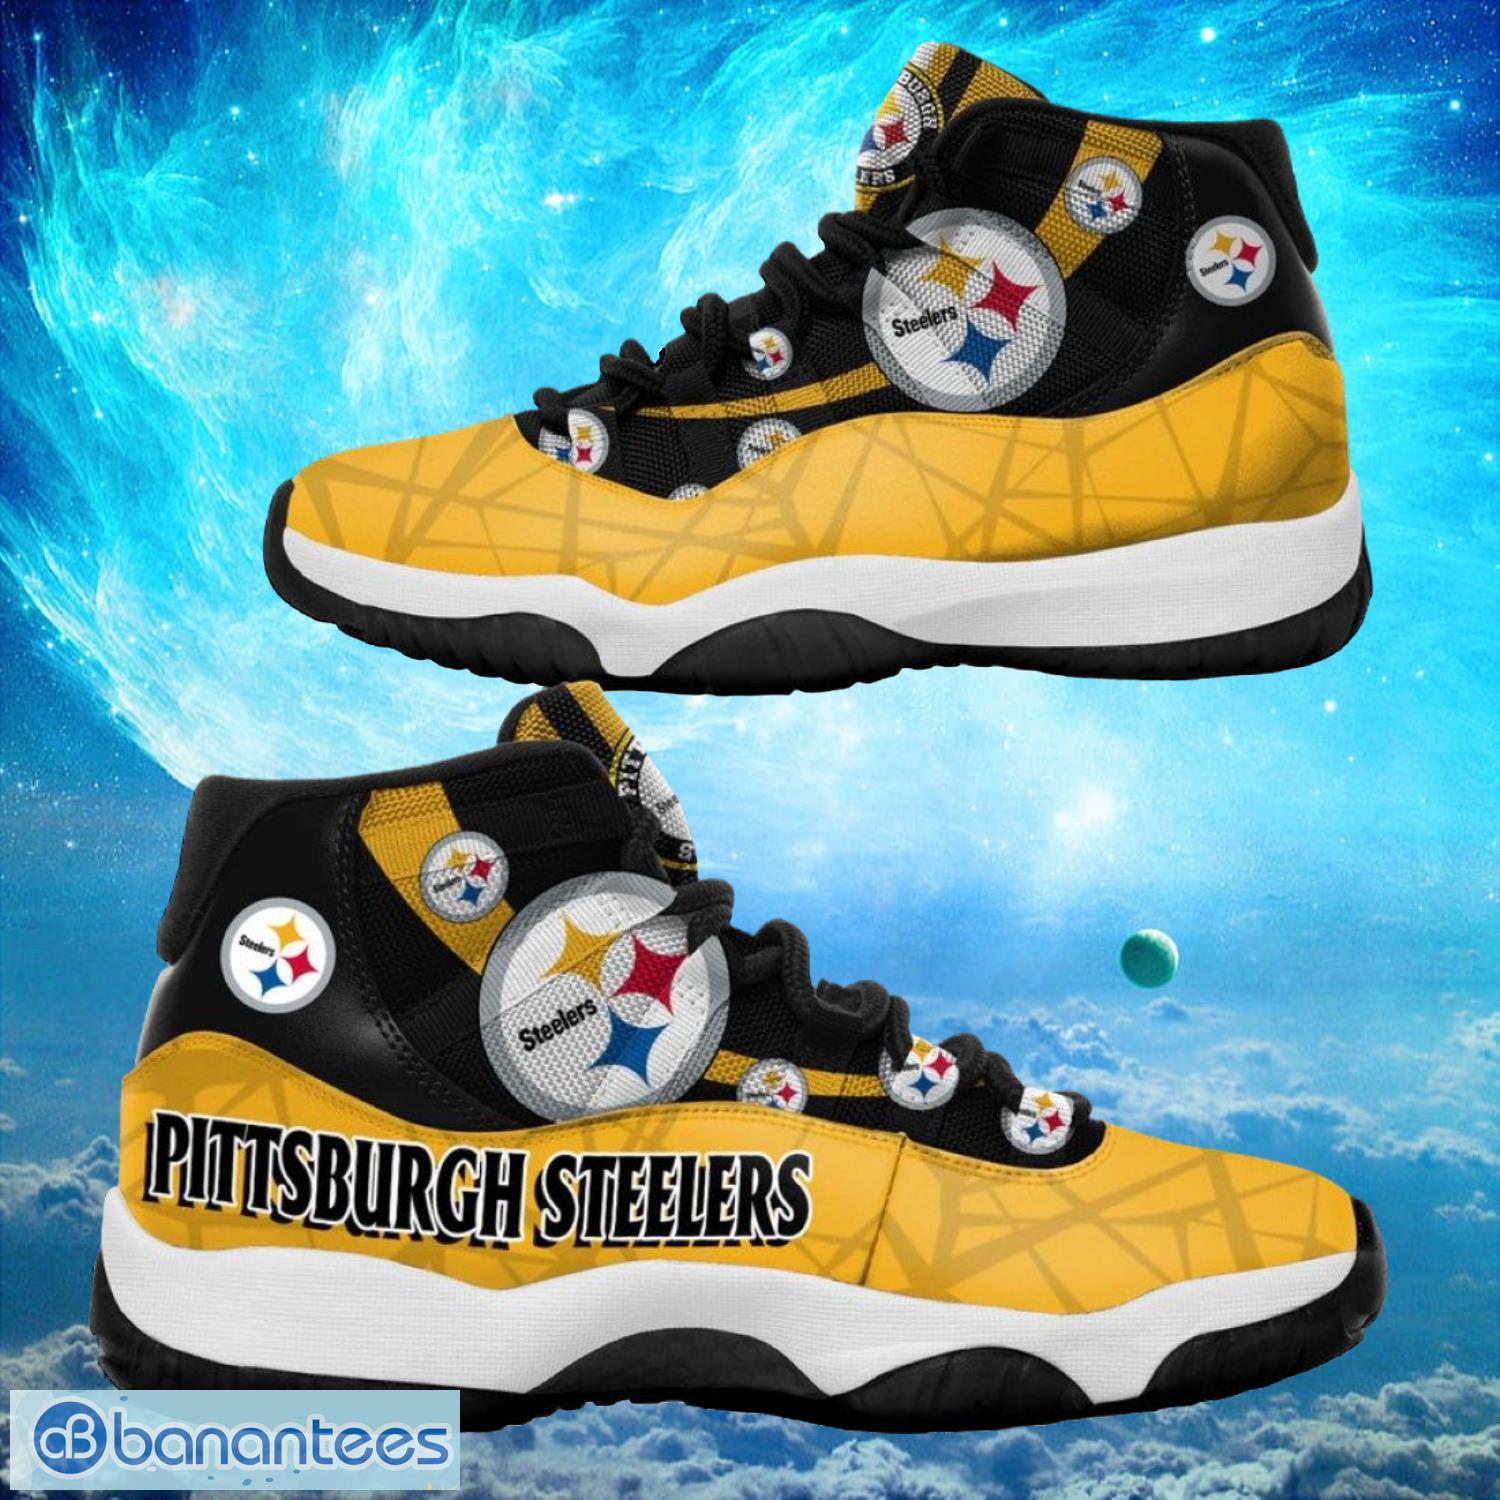 Pittsburgh Steelers NFL Air Jordan 11 Sneakers Shoes Gift For Fans Product Photo 1